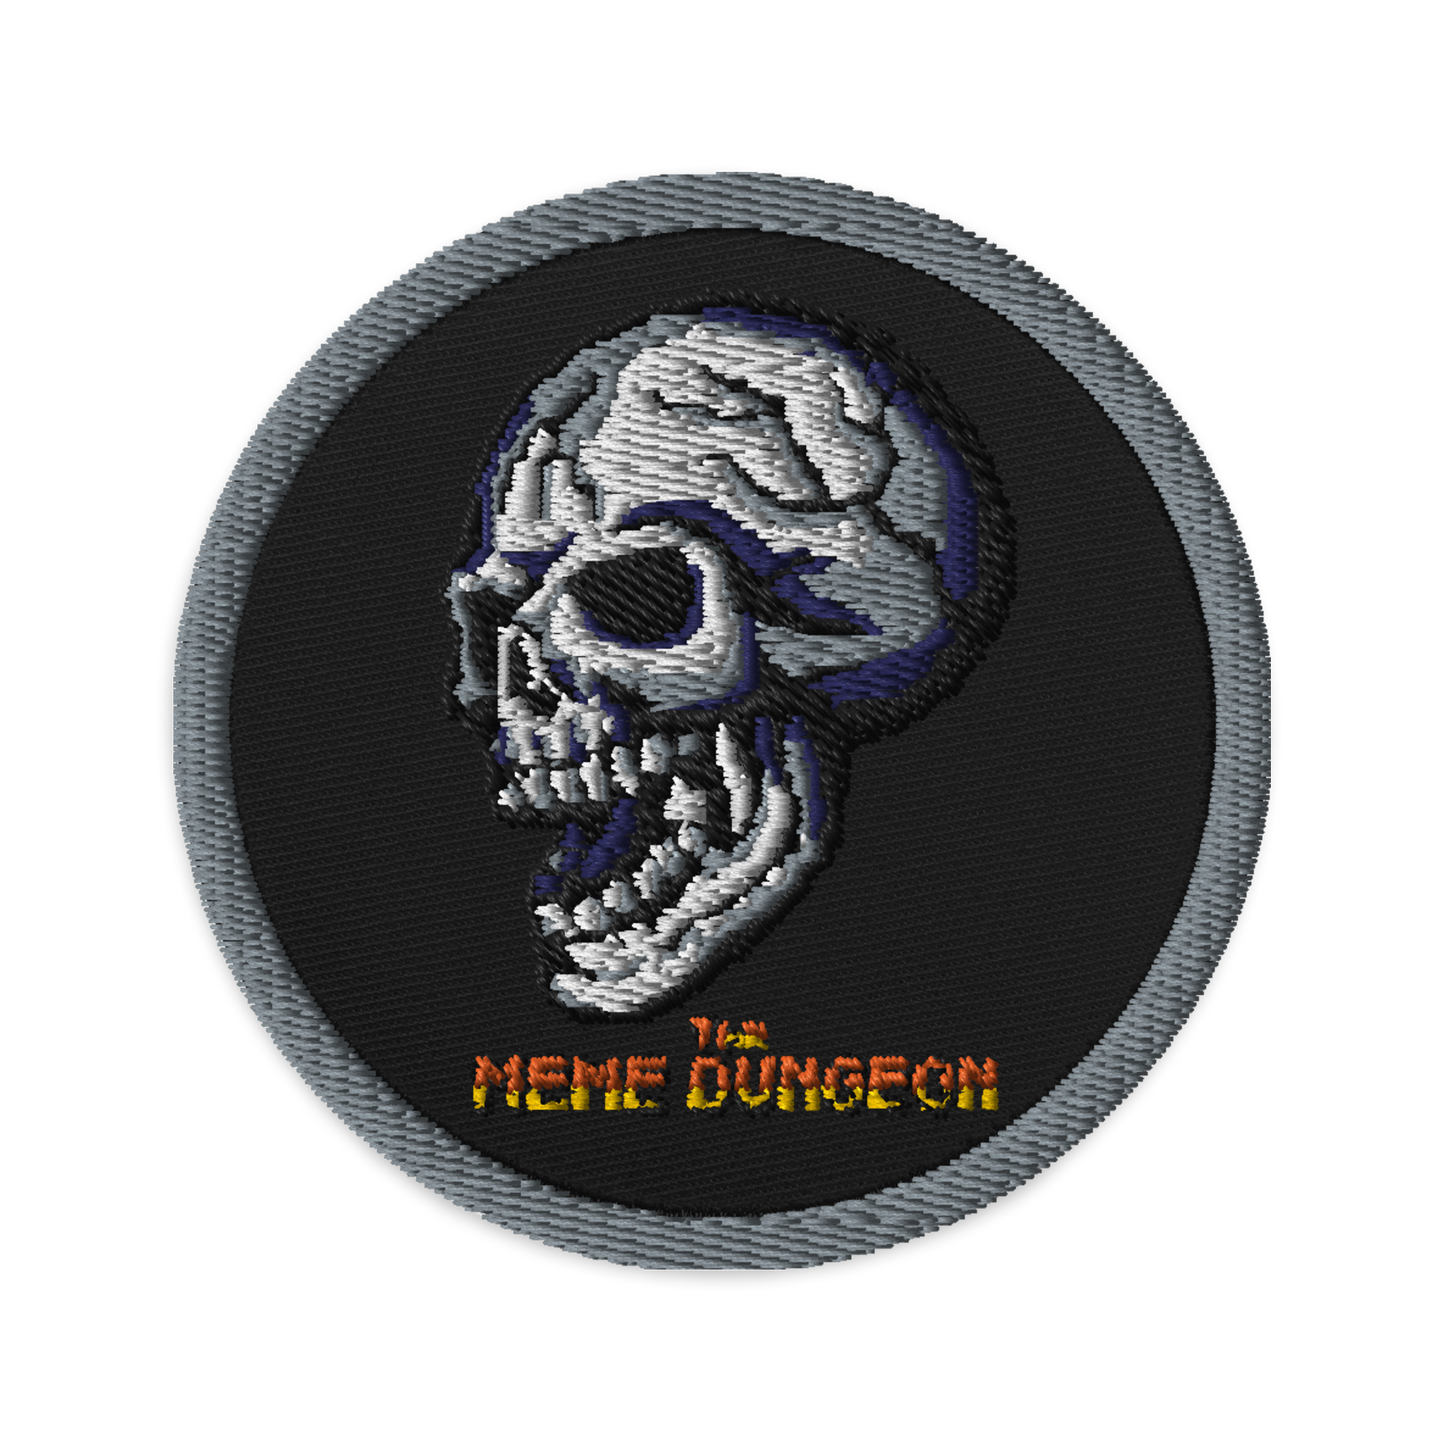 The Meme Dungeon Skull Patch